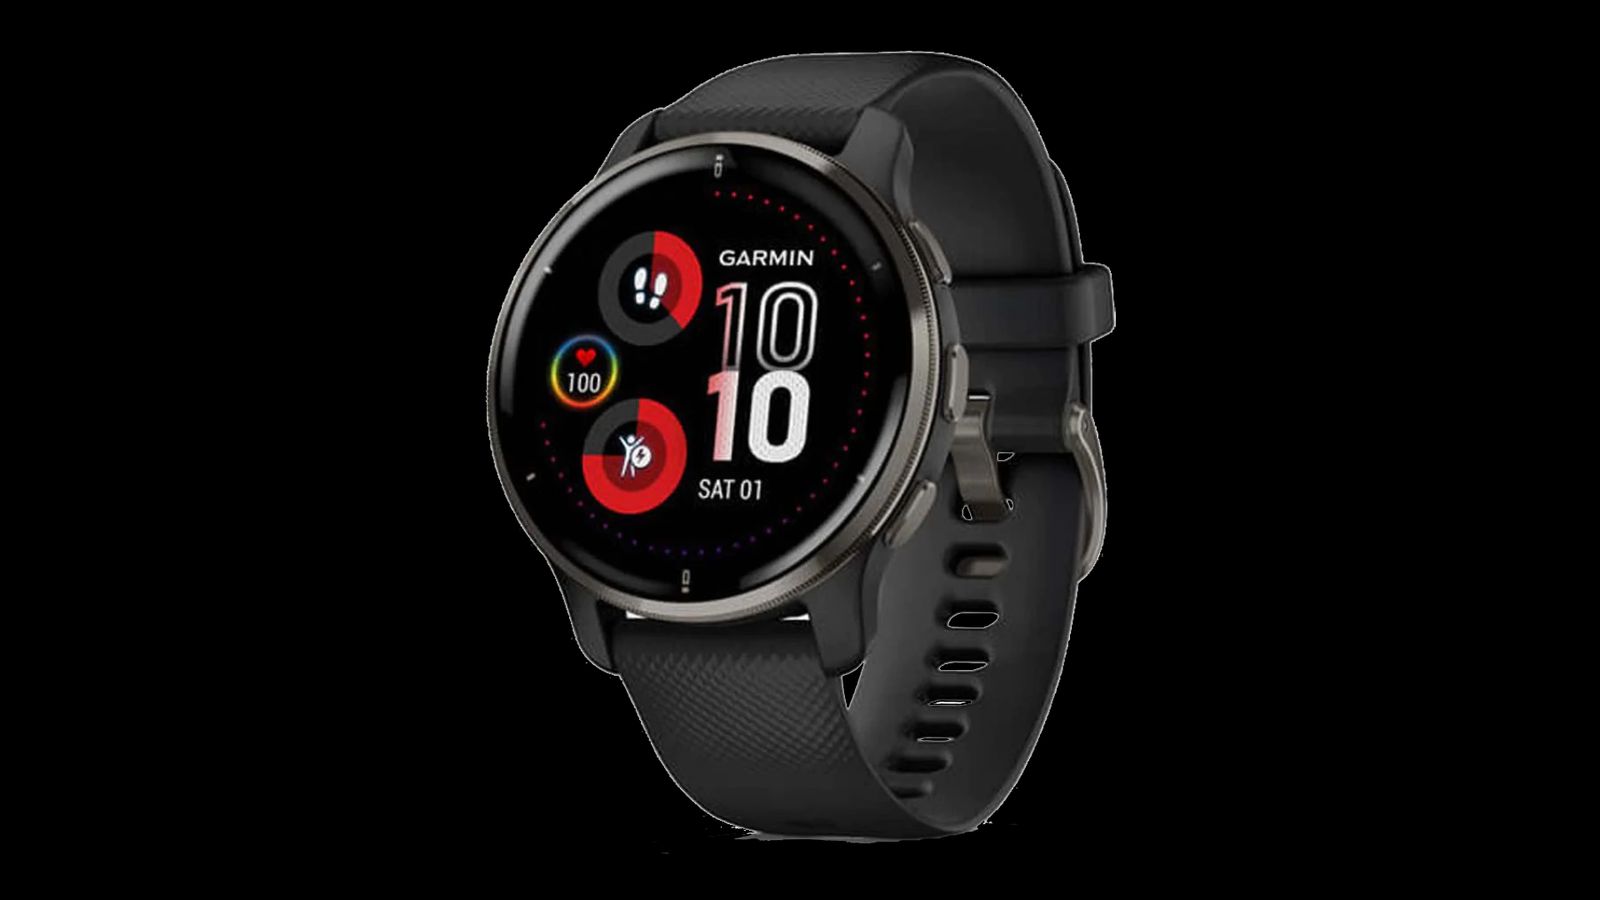 Garmin Venu 2 Plus product image stainless steel smartwatch featuring a black case and silicone band.